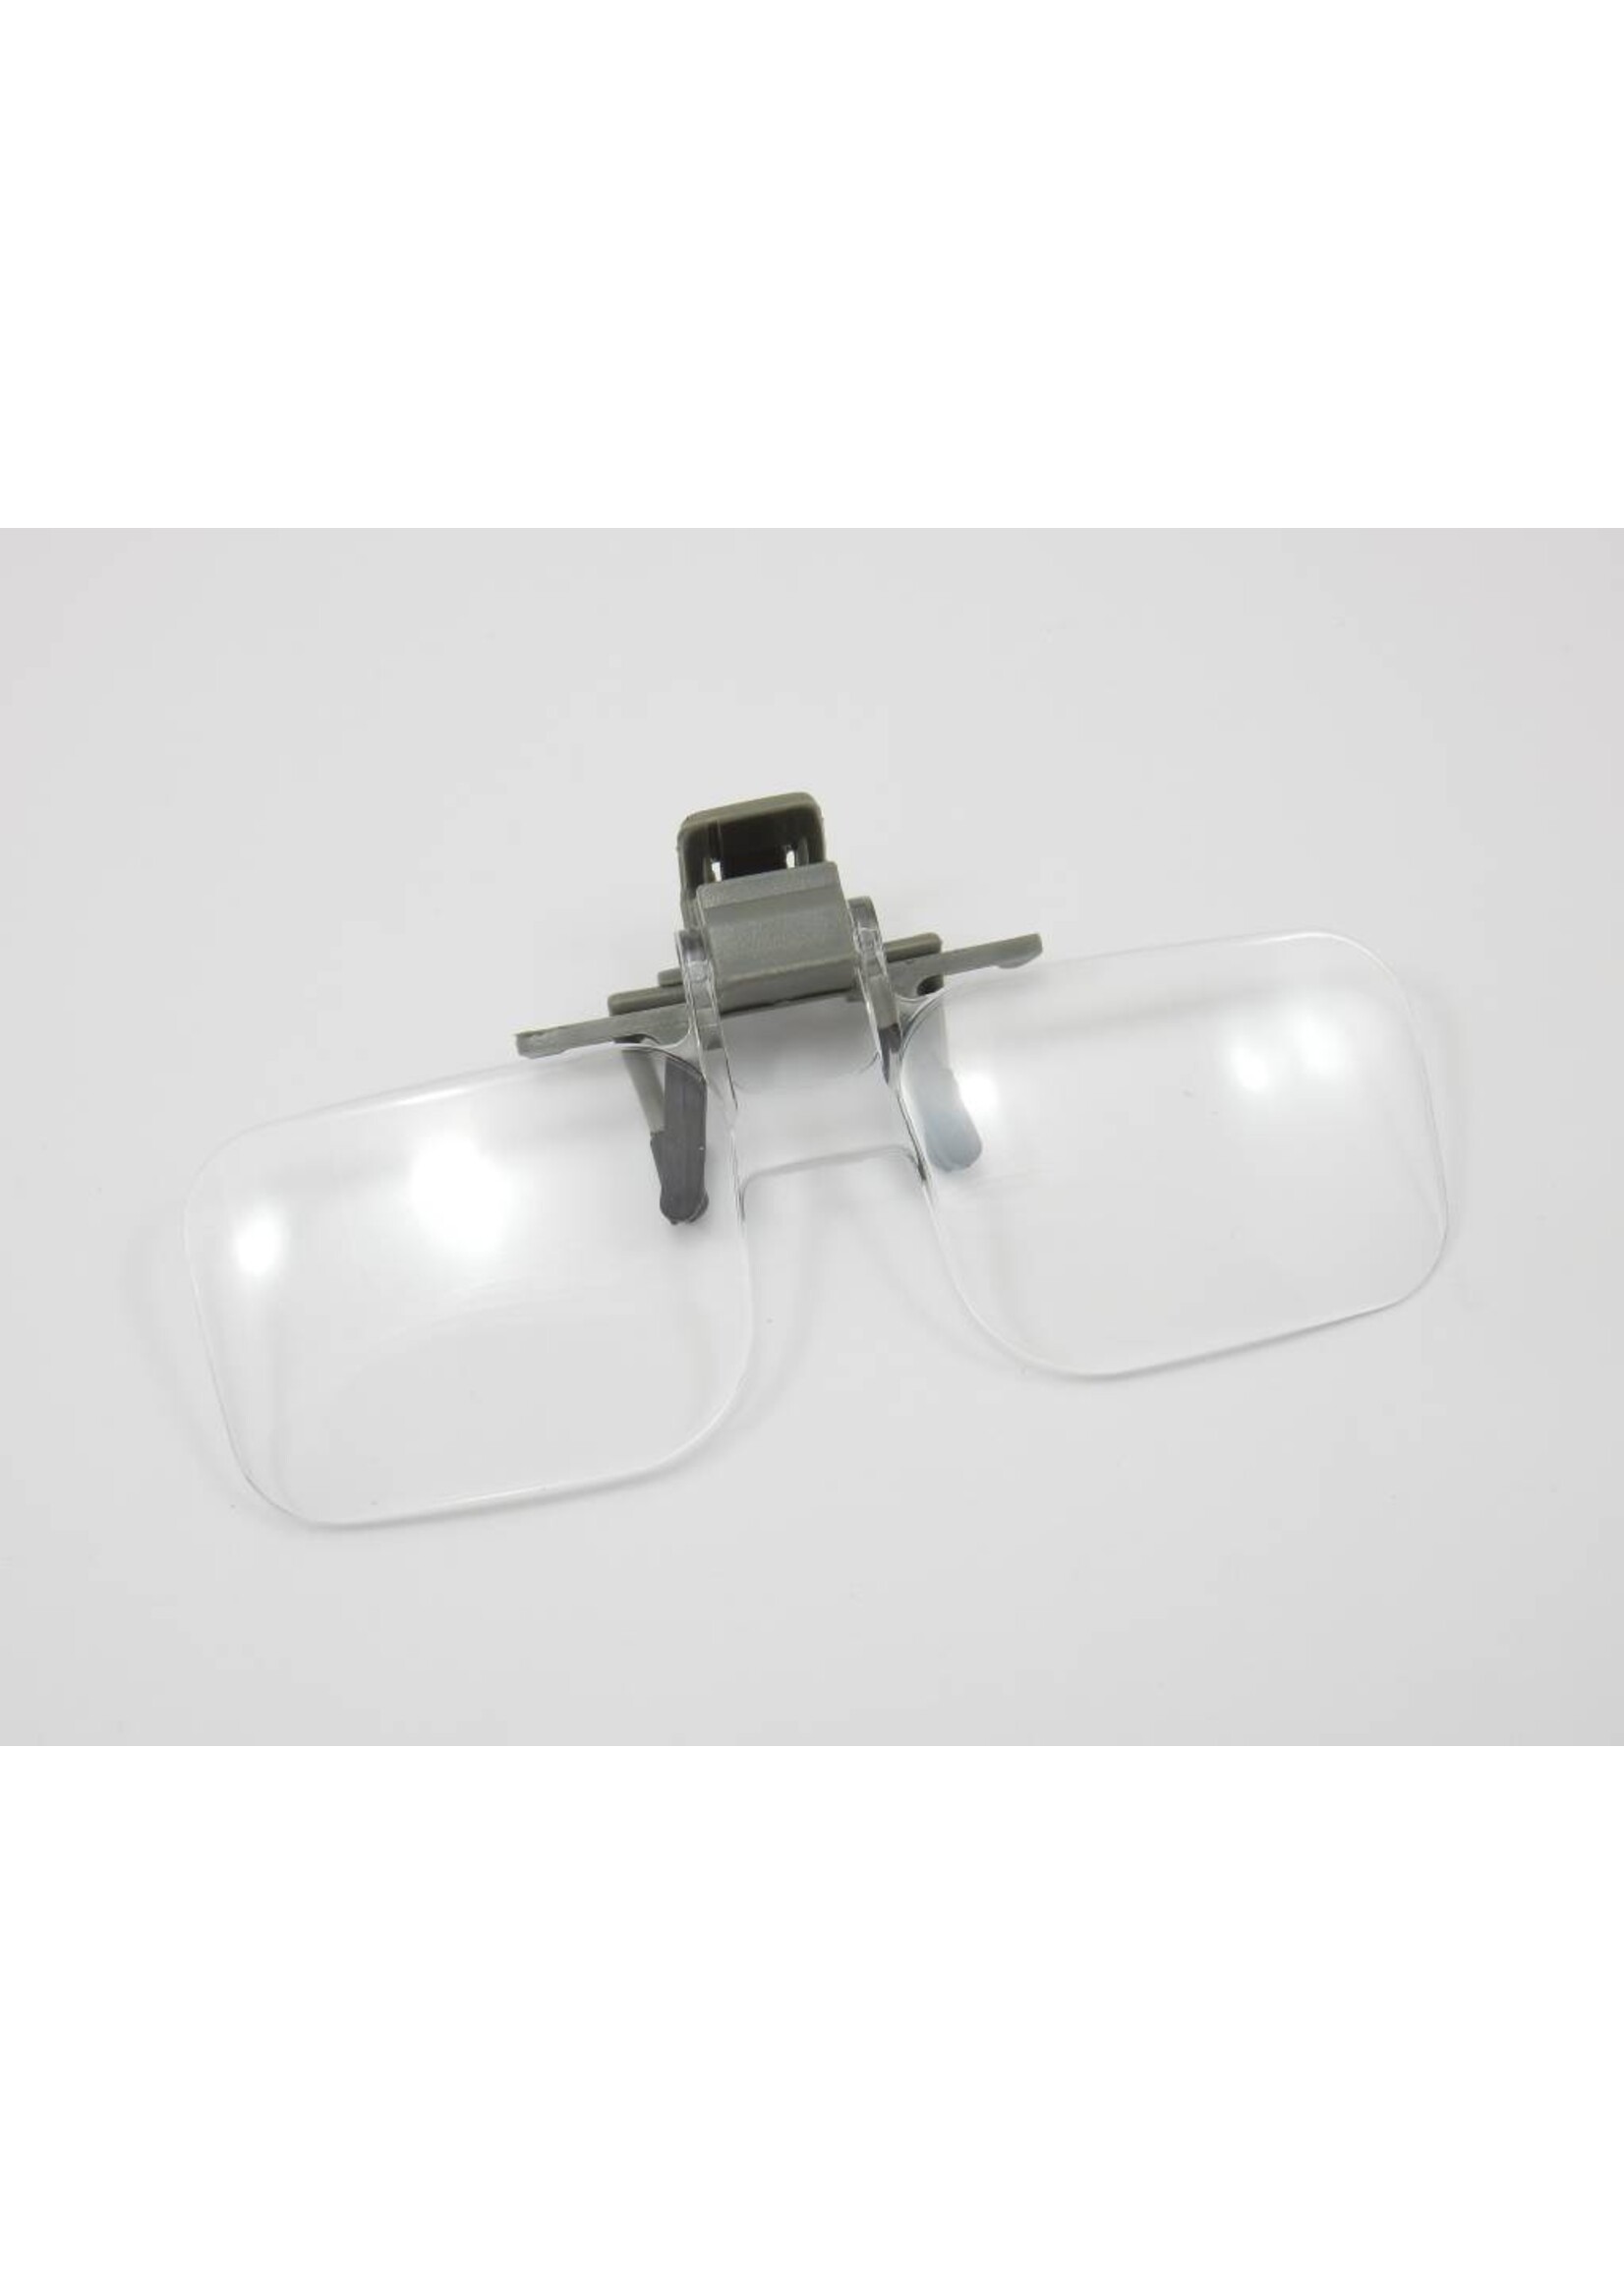 Magnifying glasses clip on - 2x magnification